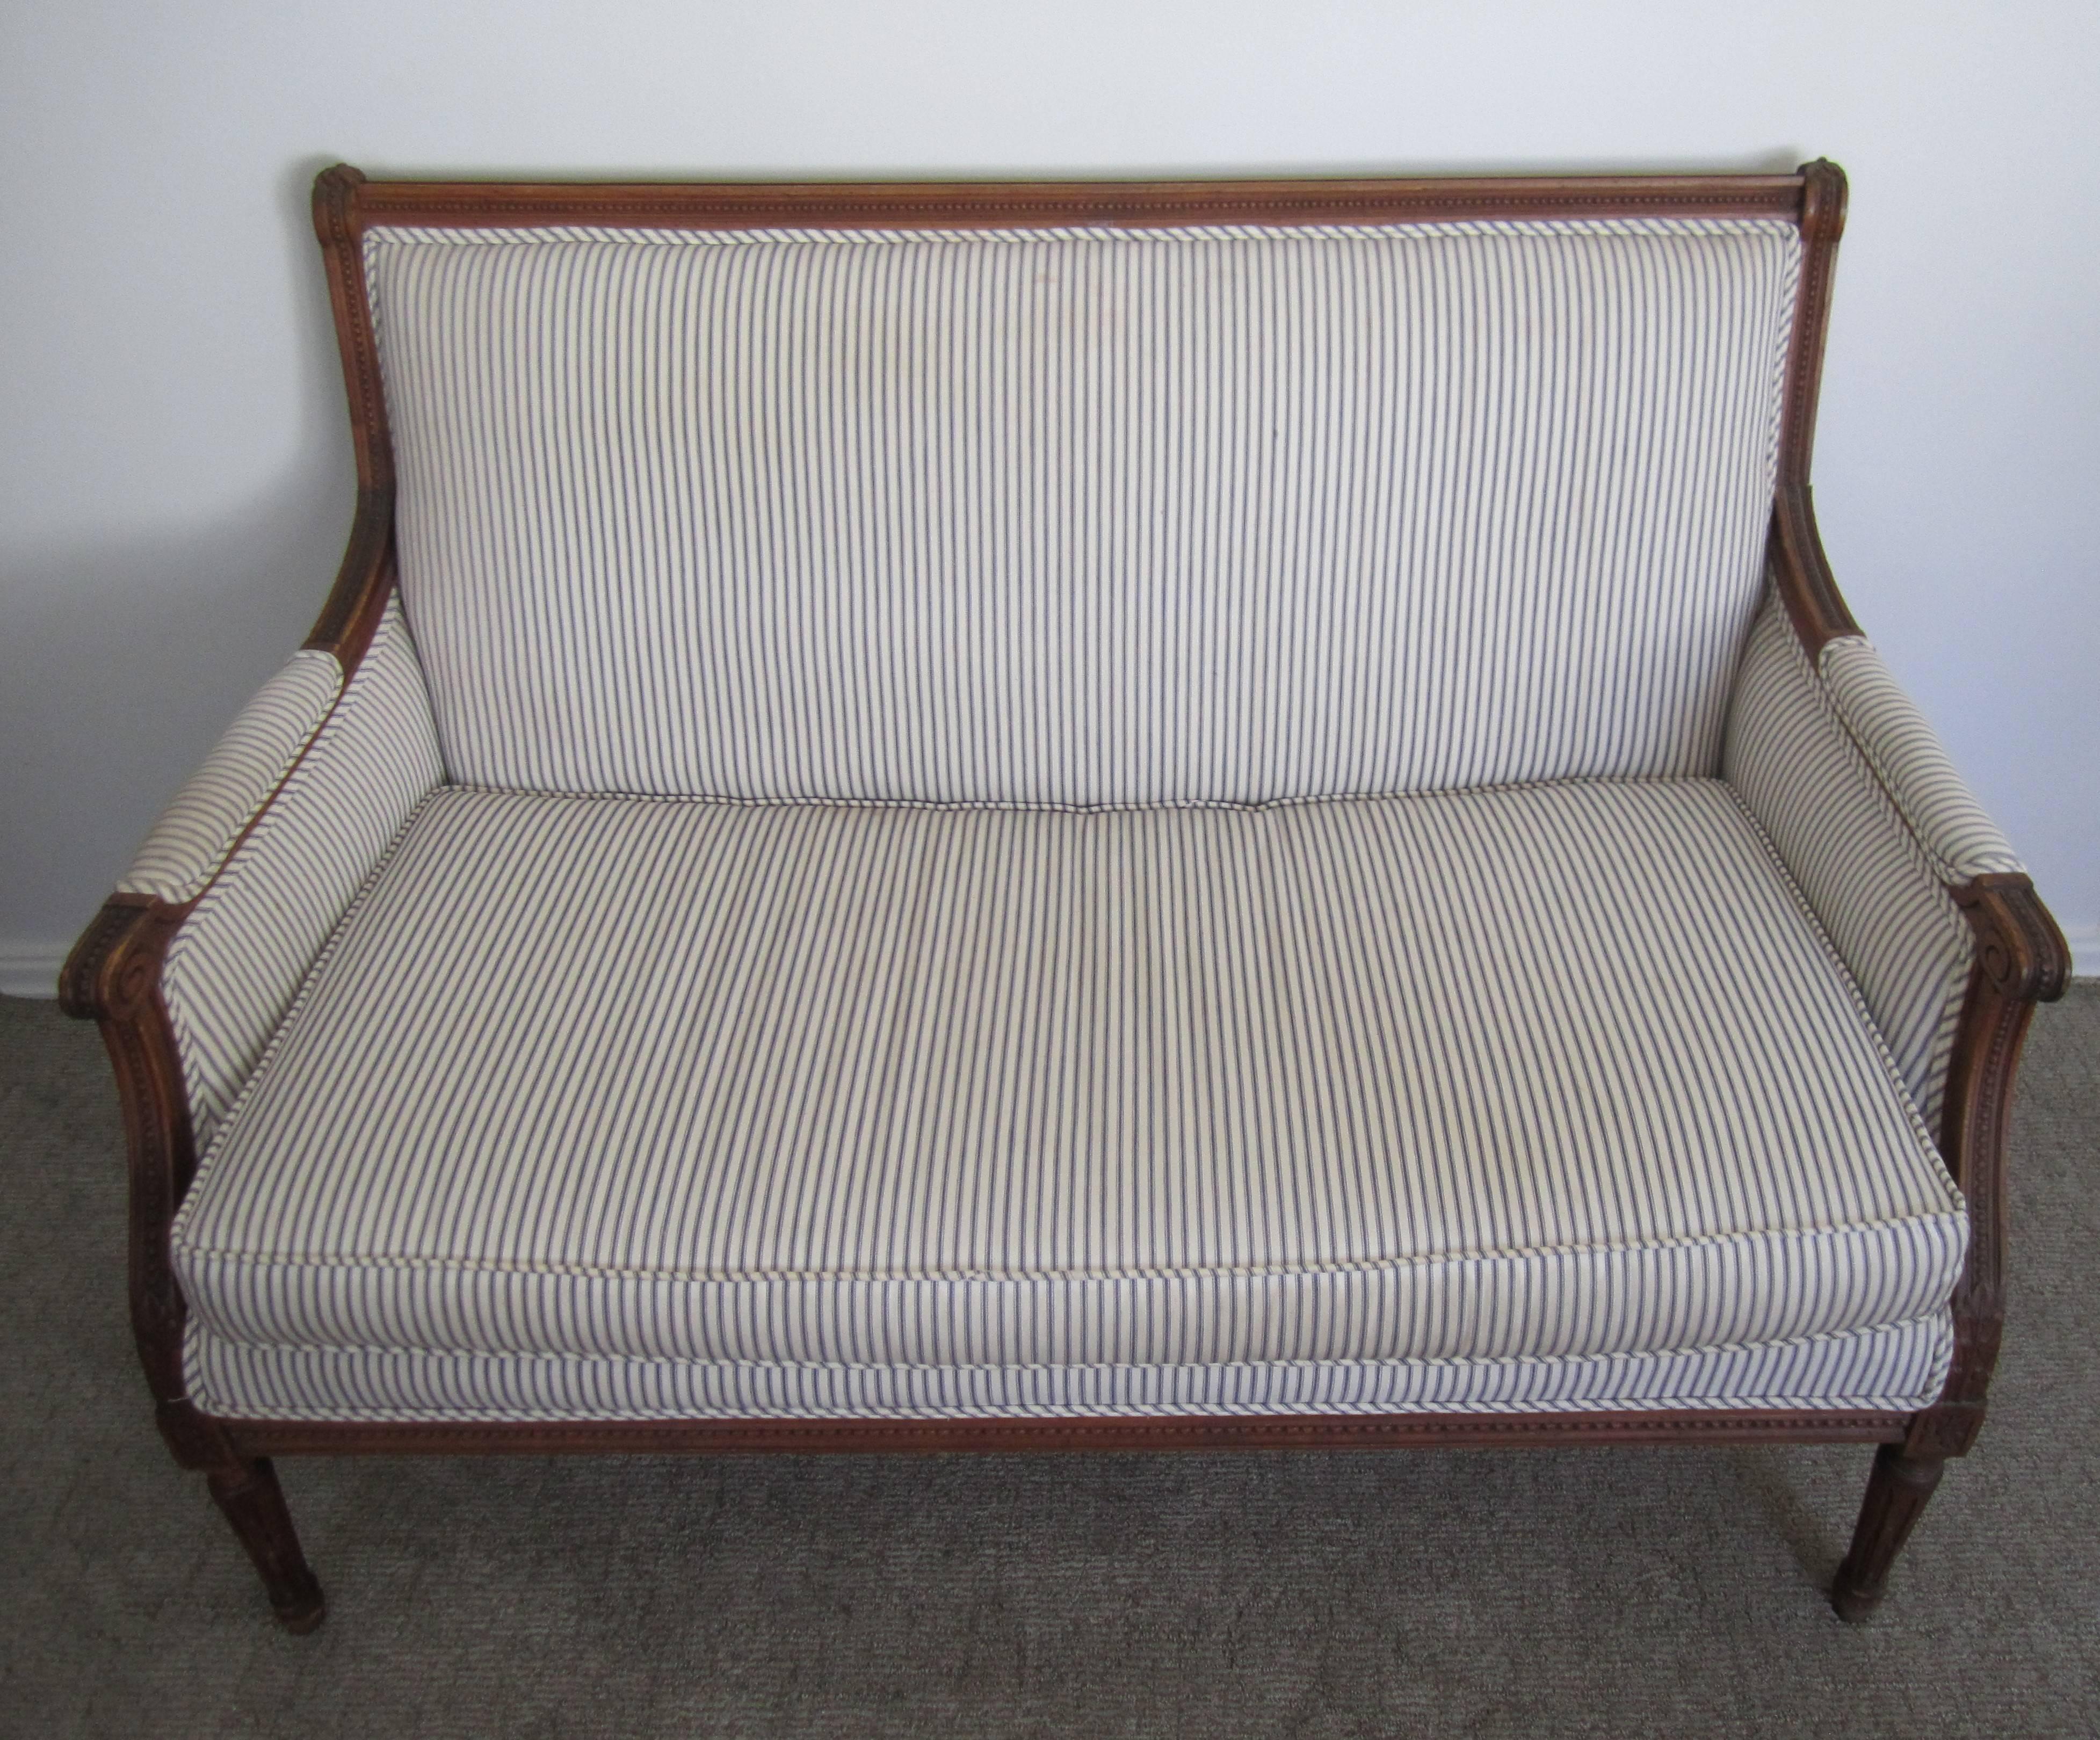 19th Century Antique French Louis XVI Style Blue and White Upholstered Settee Sofa